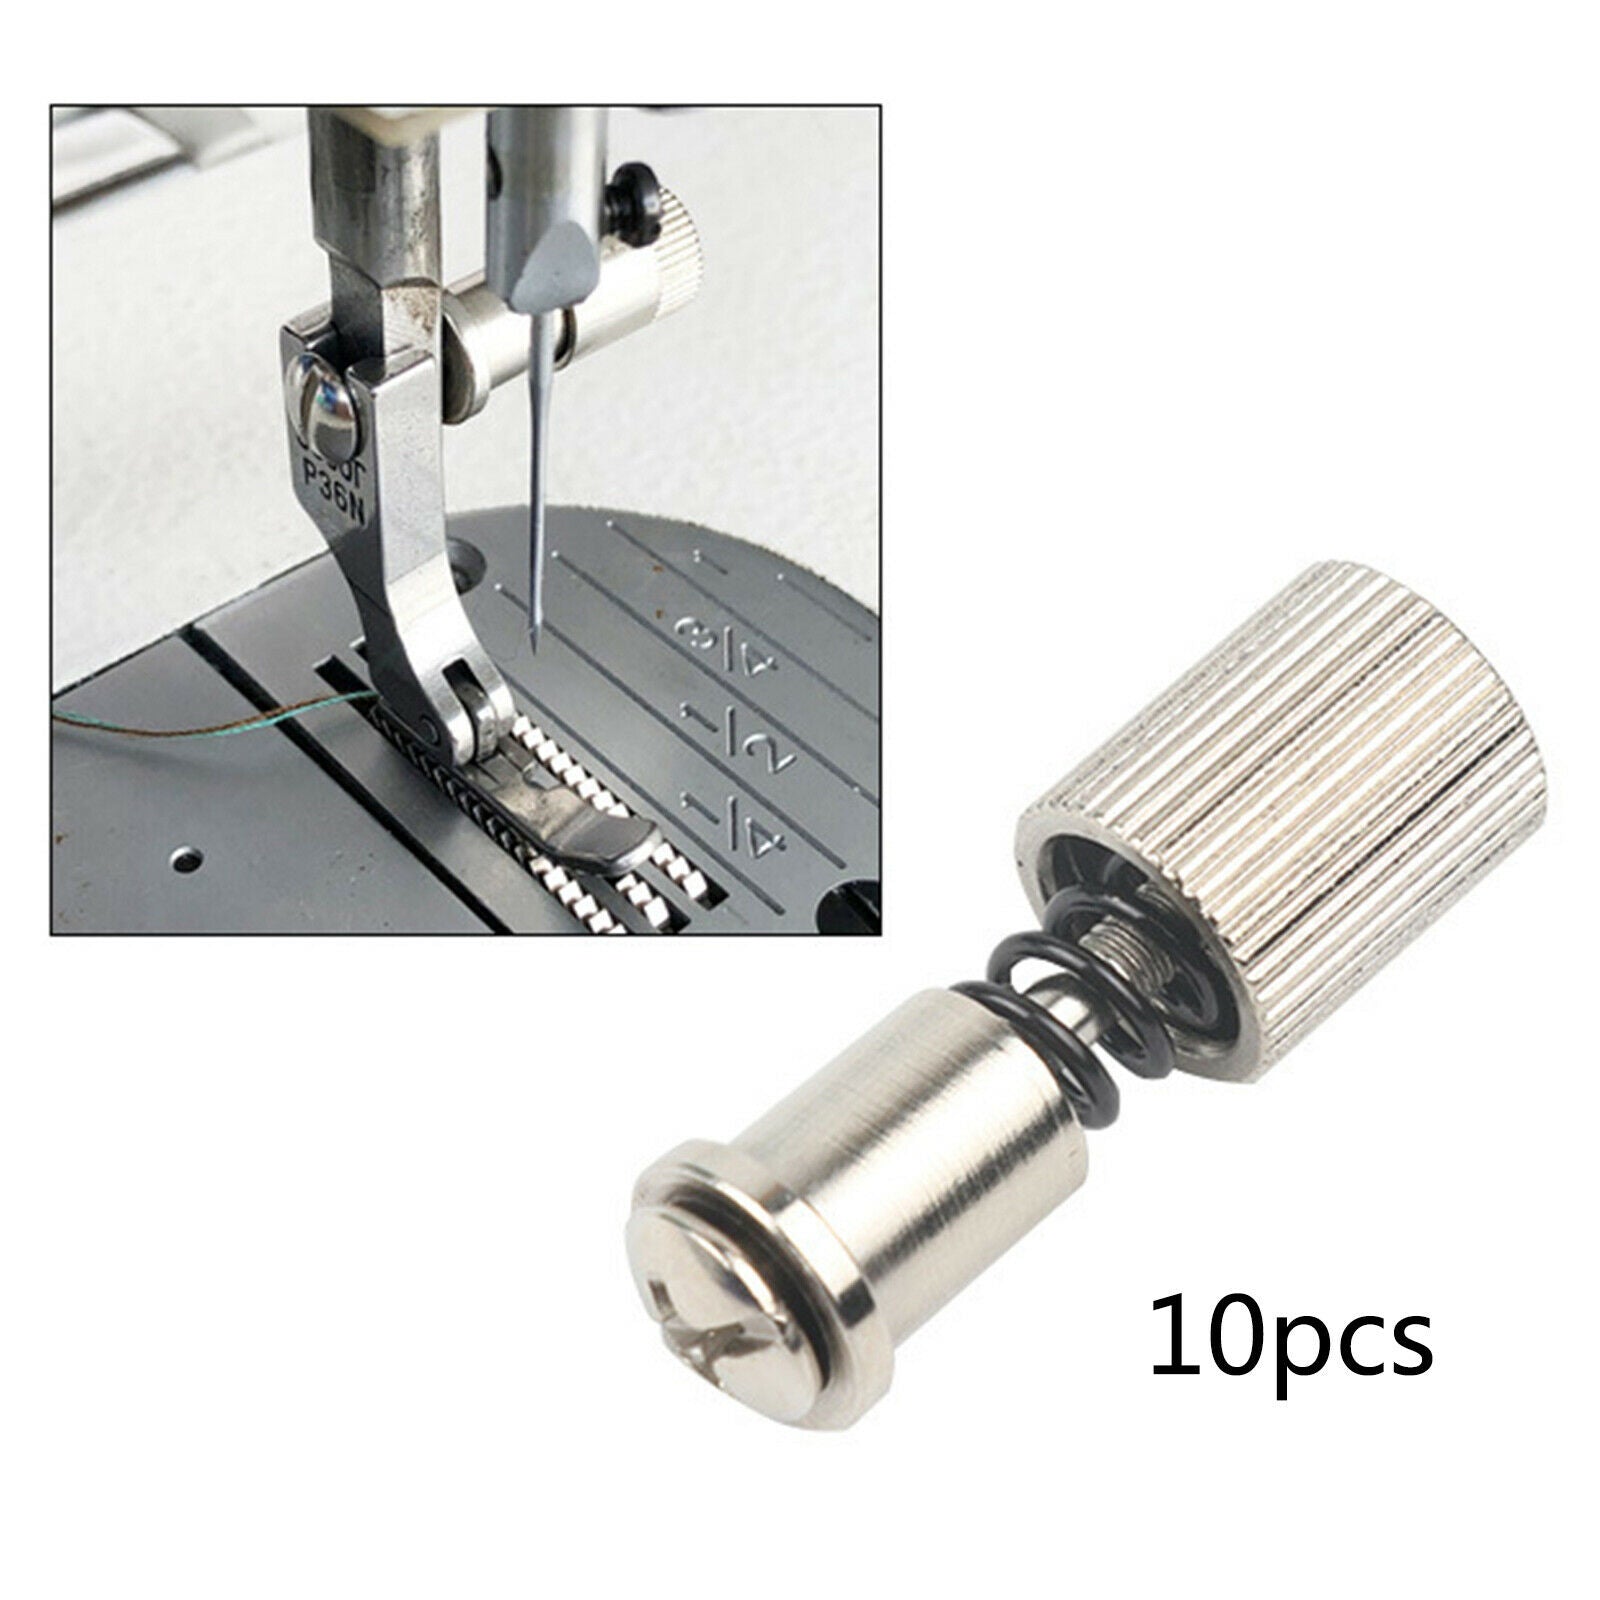 10 pieces quick change spring clip for household sewing machines